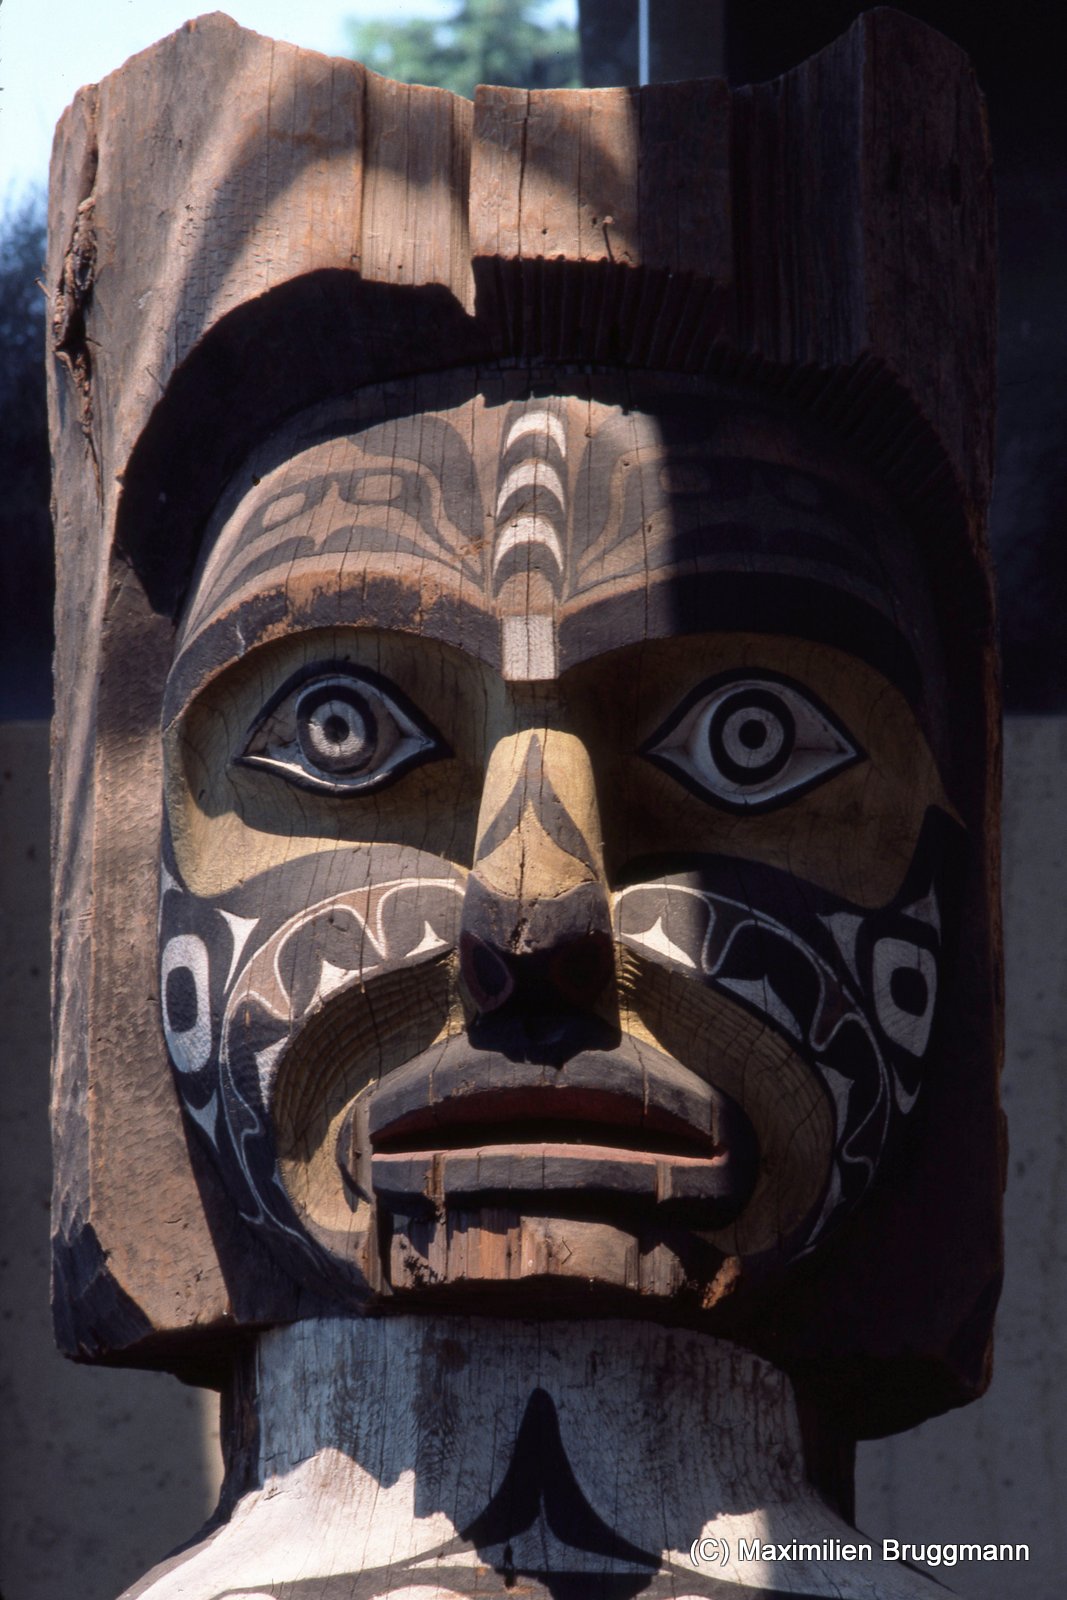 66 This 3.6-meter-tall (12-foot-tall) ancestral figure, carved from the wood of a red cedar, served as a house post in the interior of a Koskimo Kwakiutl house in Quatsino. The lower portion shows two slaves carry¬ing a plank, which presumably served as the seat for a chief. A killer whale and coppers are depicted on the figure. (MOA)